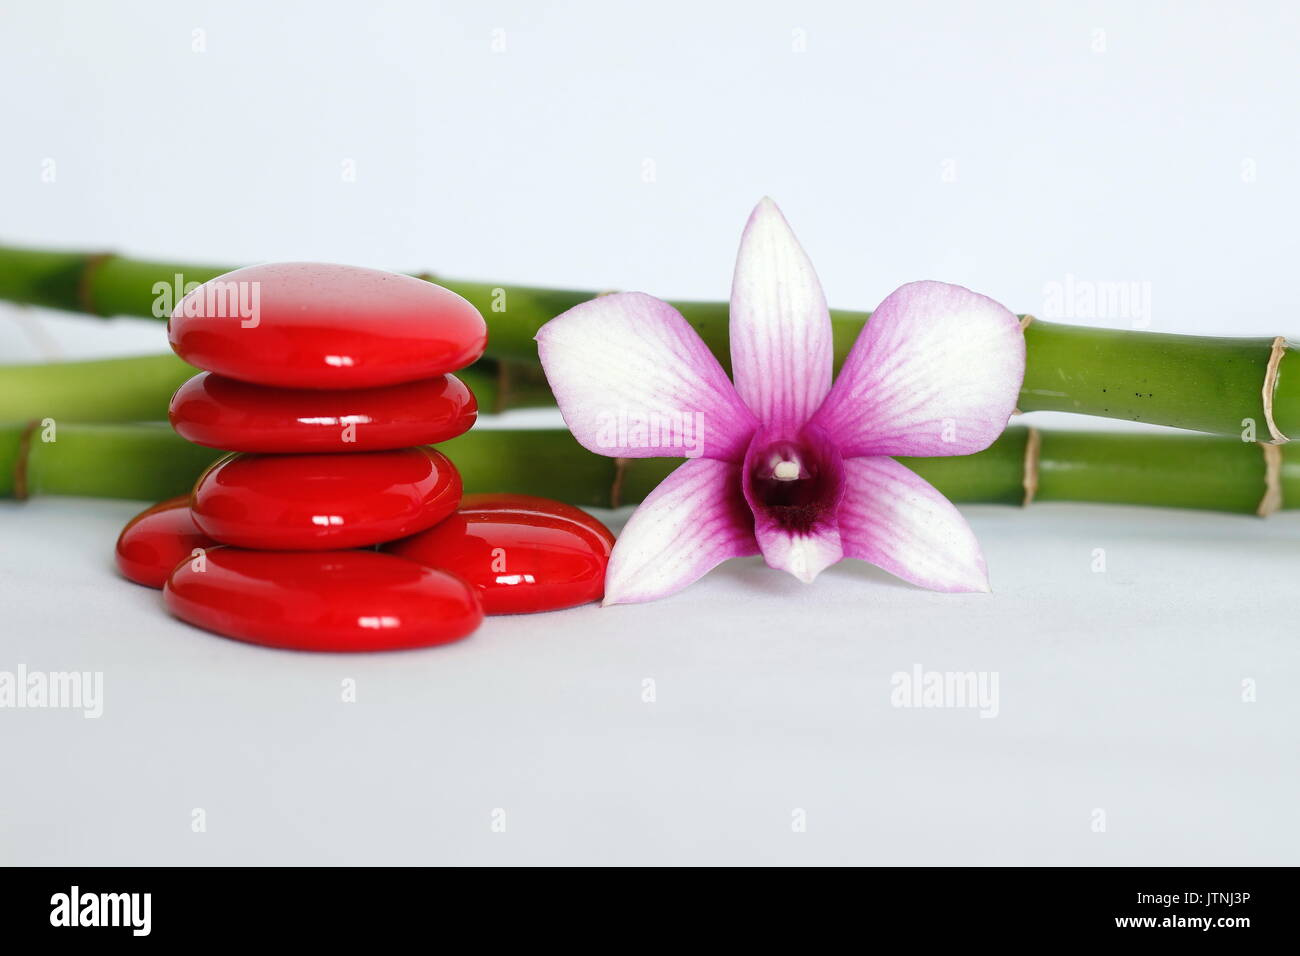 Red pebbles arranged in zen lifestyle with a two-tone orchid on the right side of the bamboo posed behind the whole on a white background Stock Photo